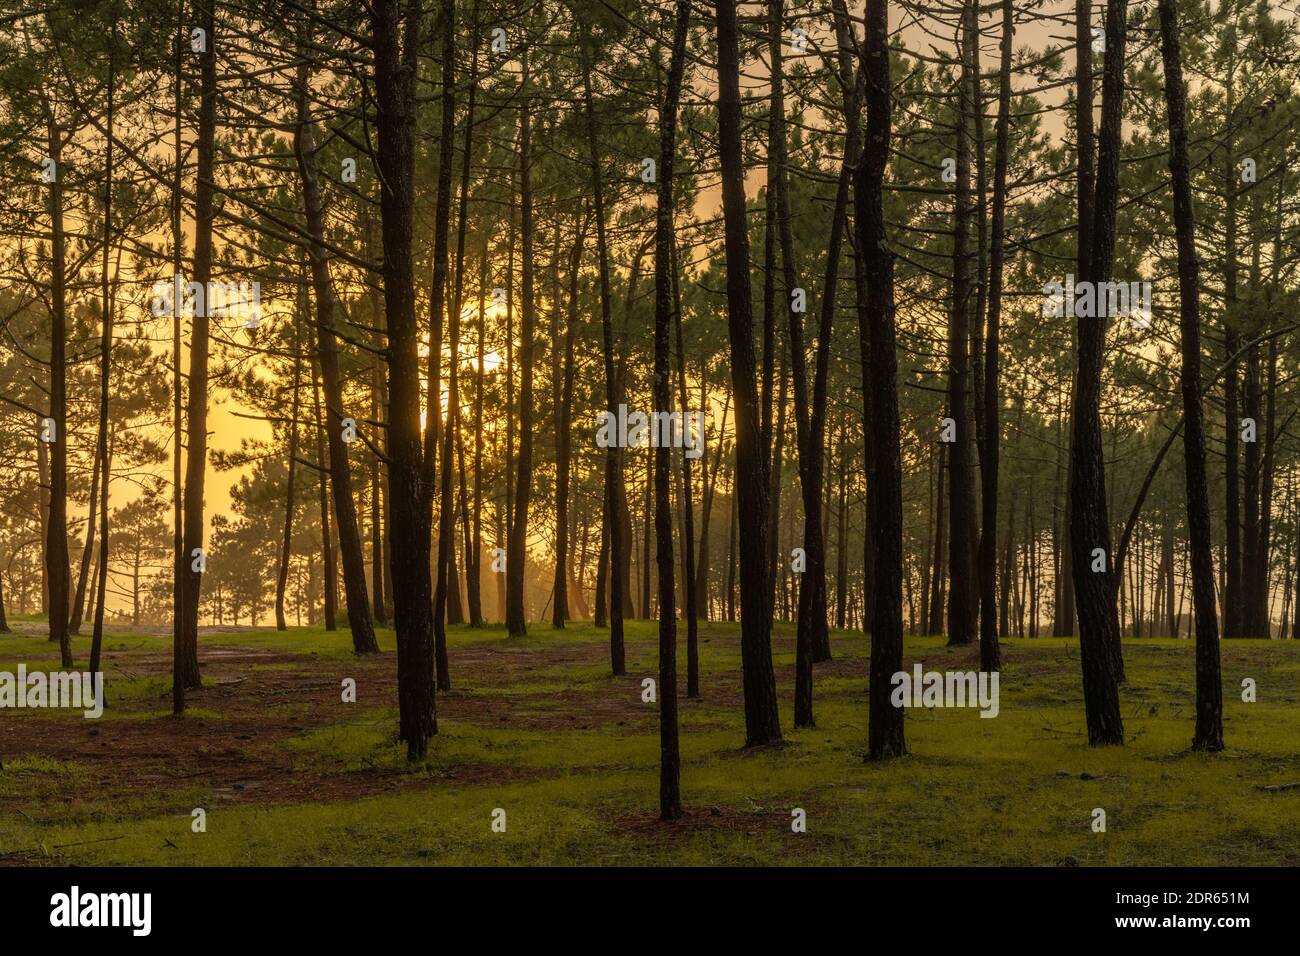 View of beautiful warm golden sunlight shining through a dense forest in the evening Stock Photo